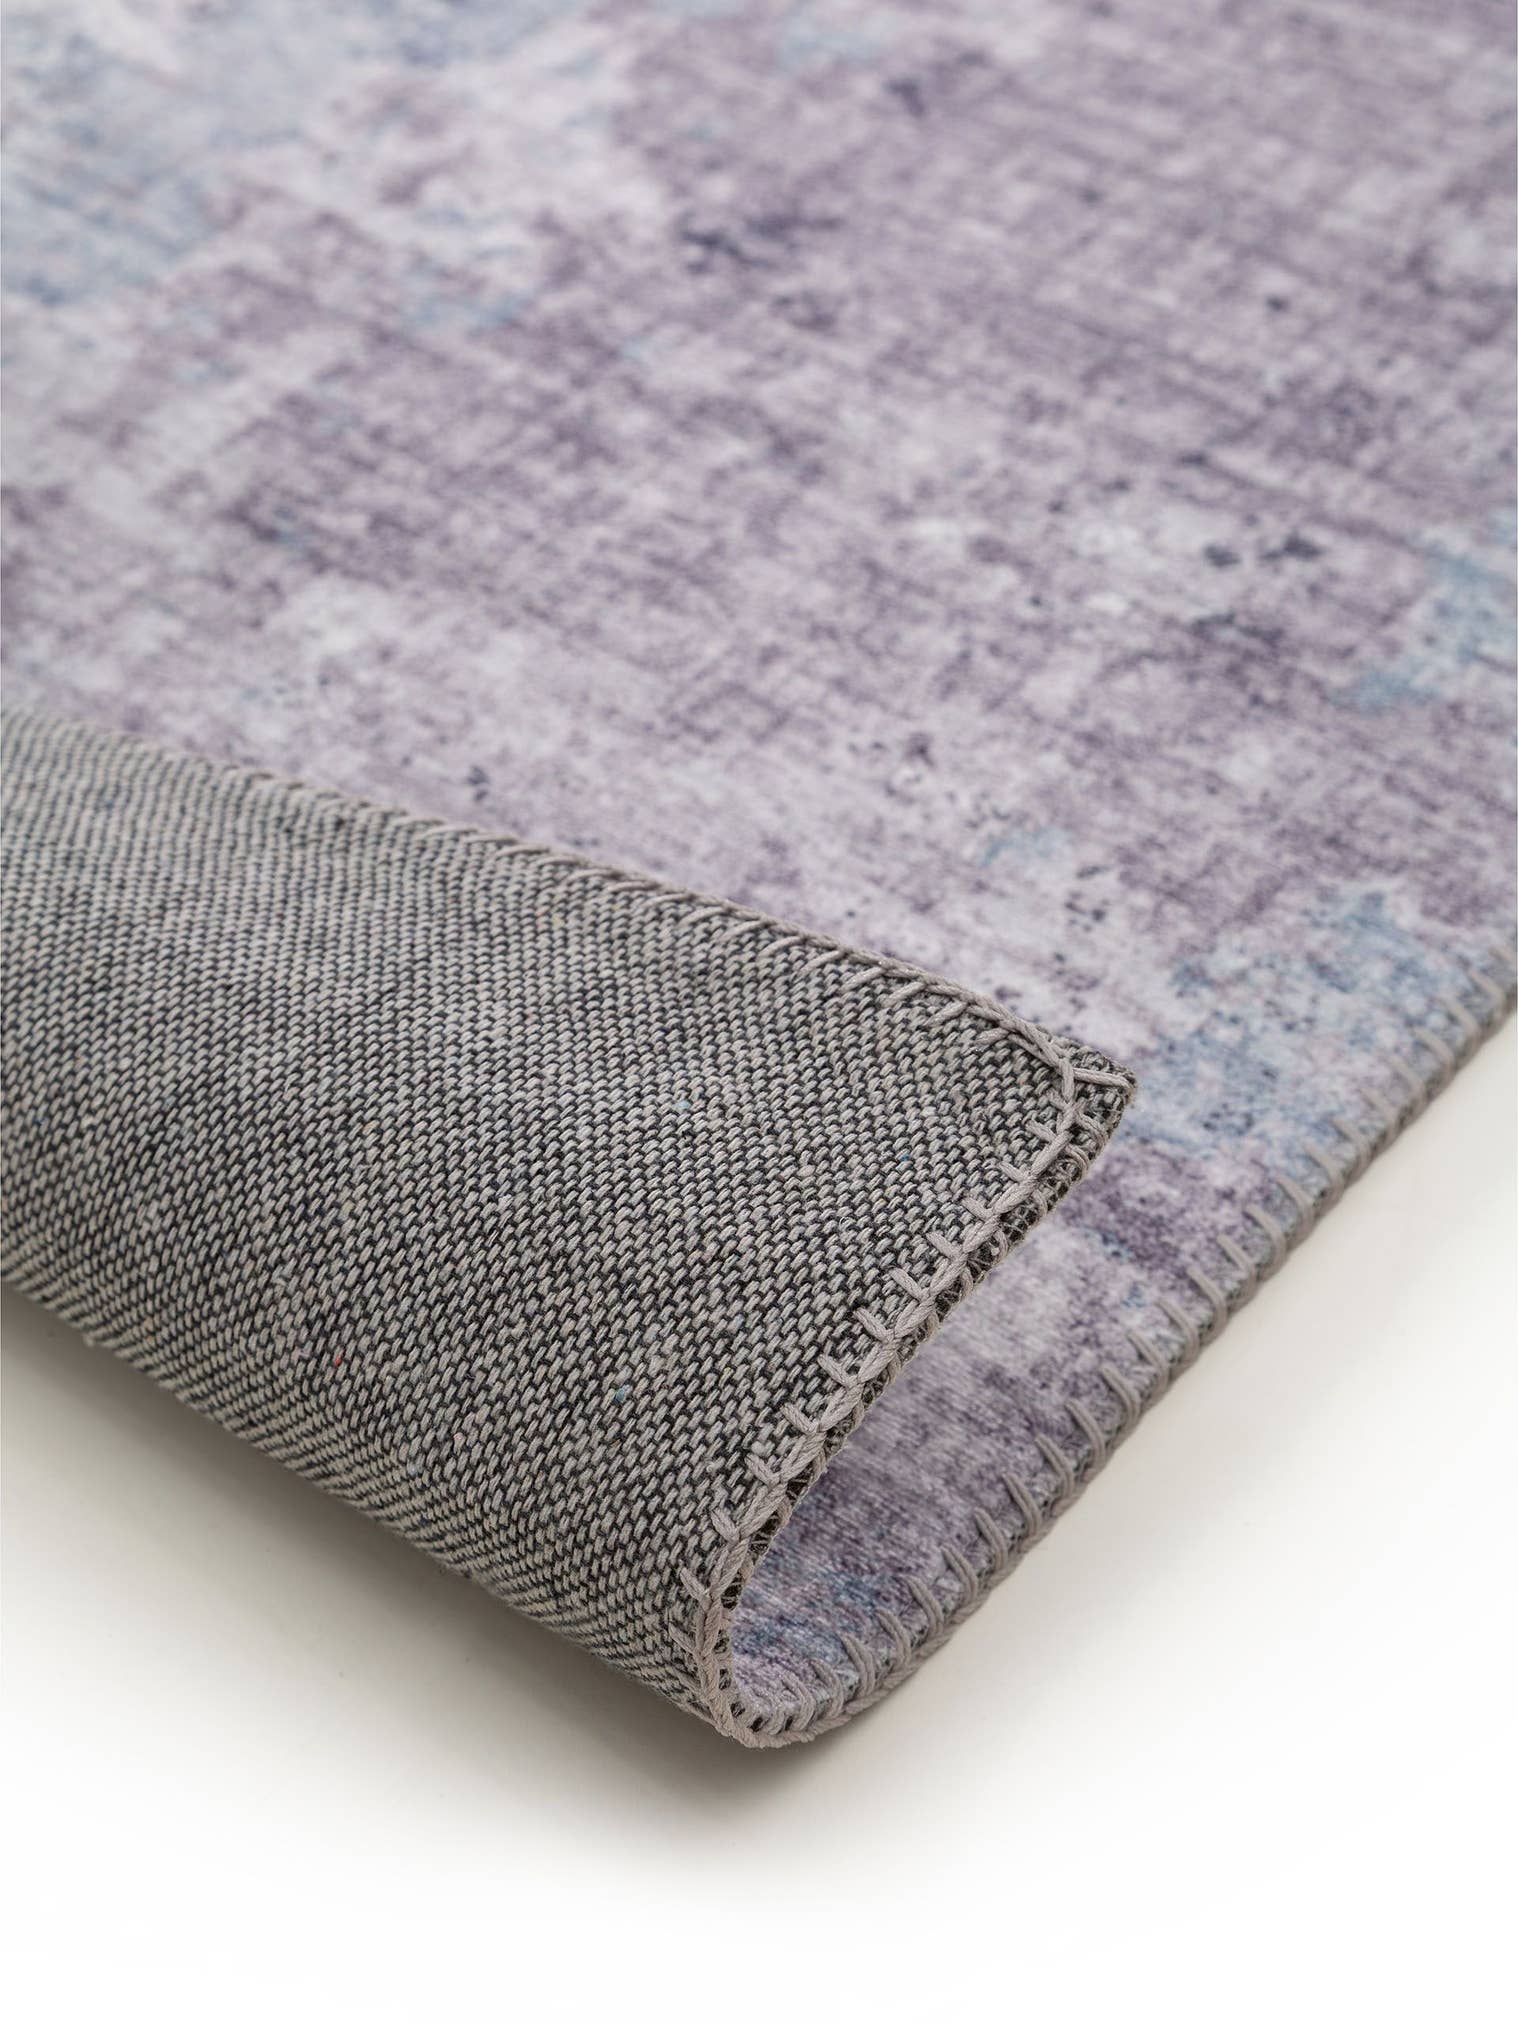 Rug made of 100% Polyester in Grey with a 1- 5 mm high pile by benuta Pop